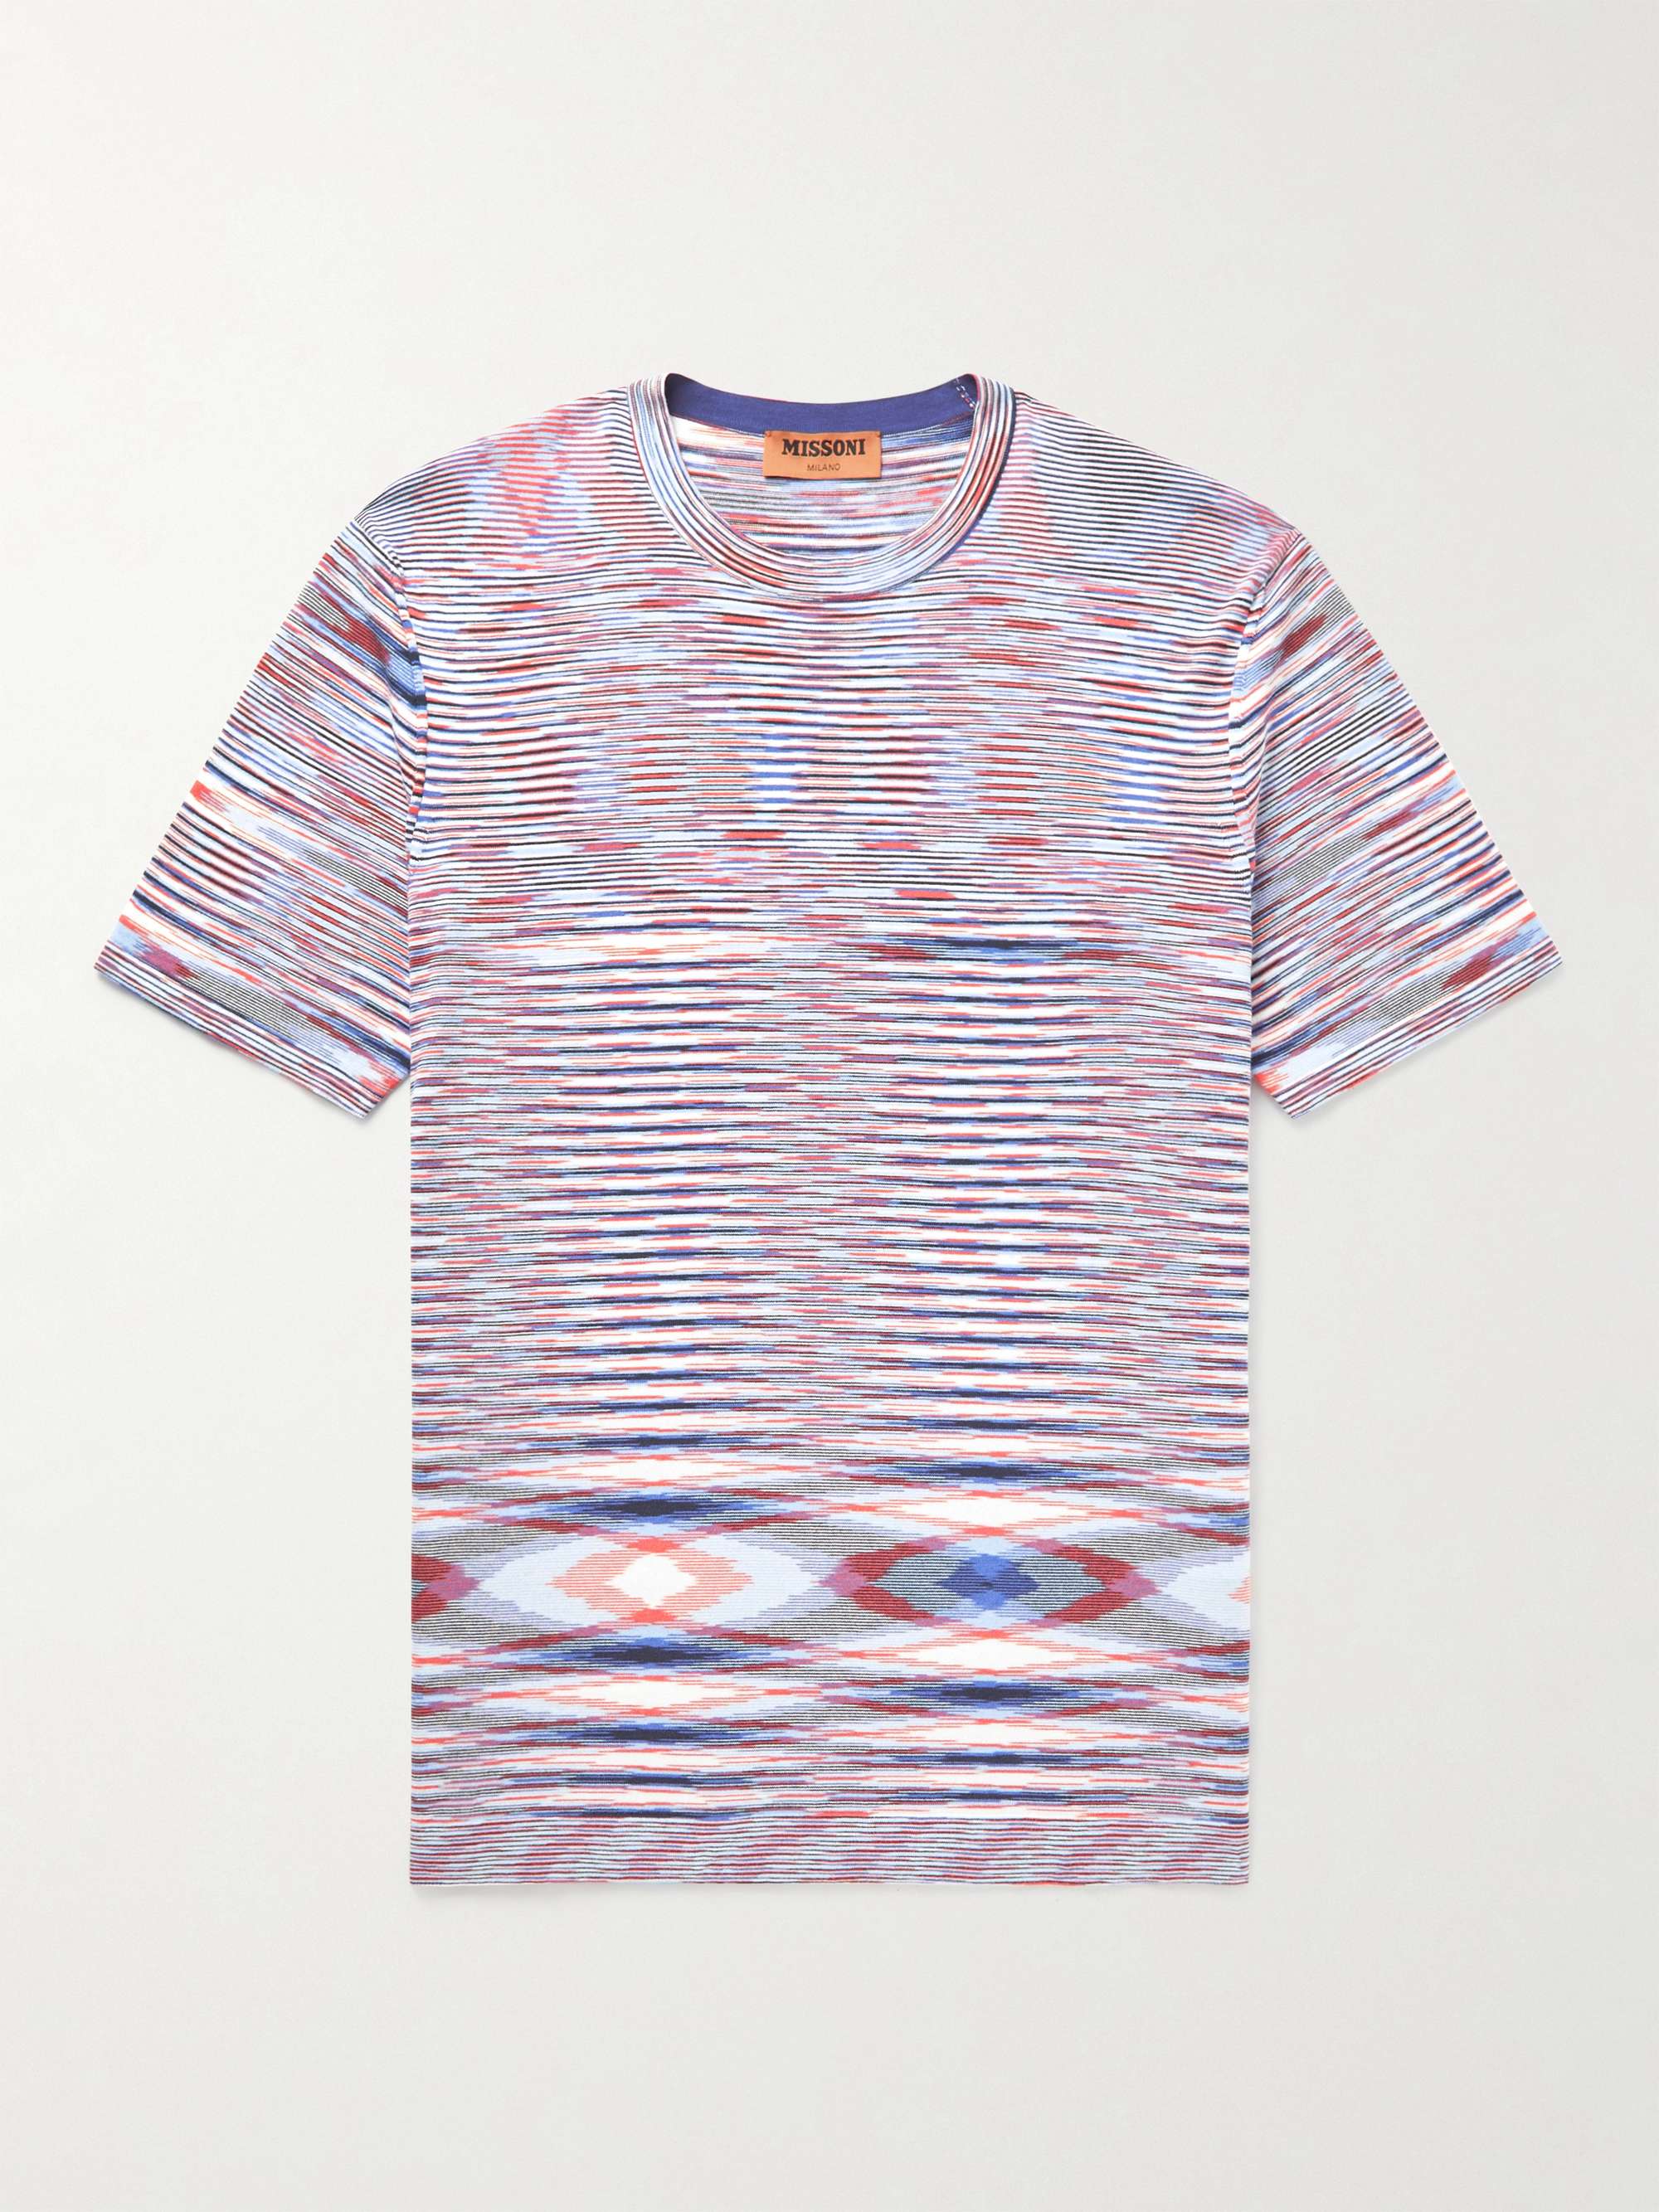 MISSONI Space-Dyed Cotton-Jersey T-Shirt